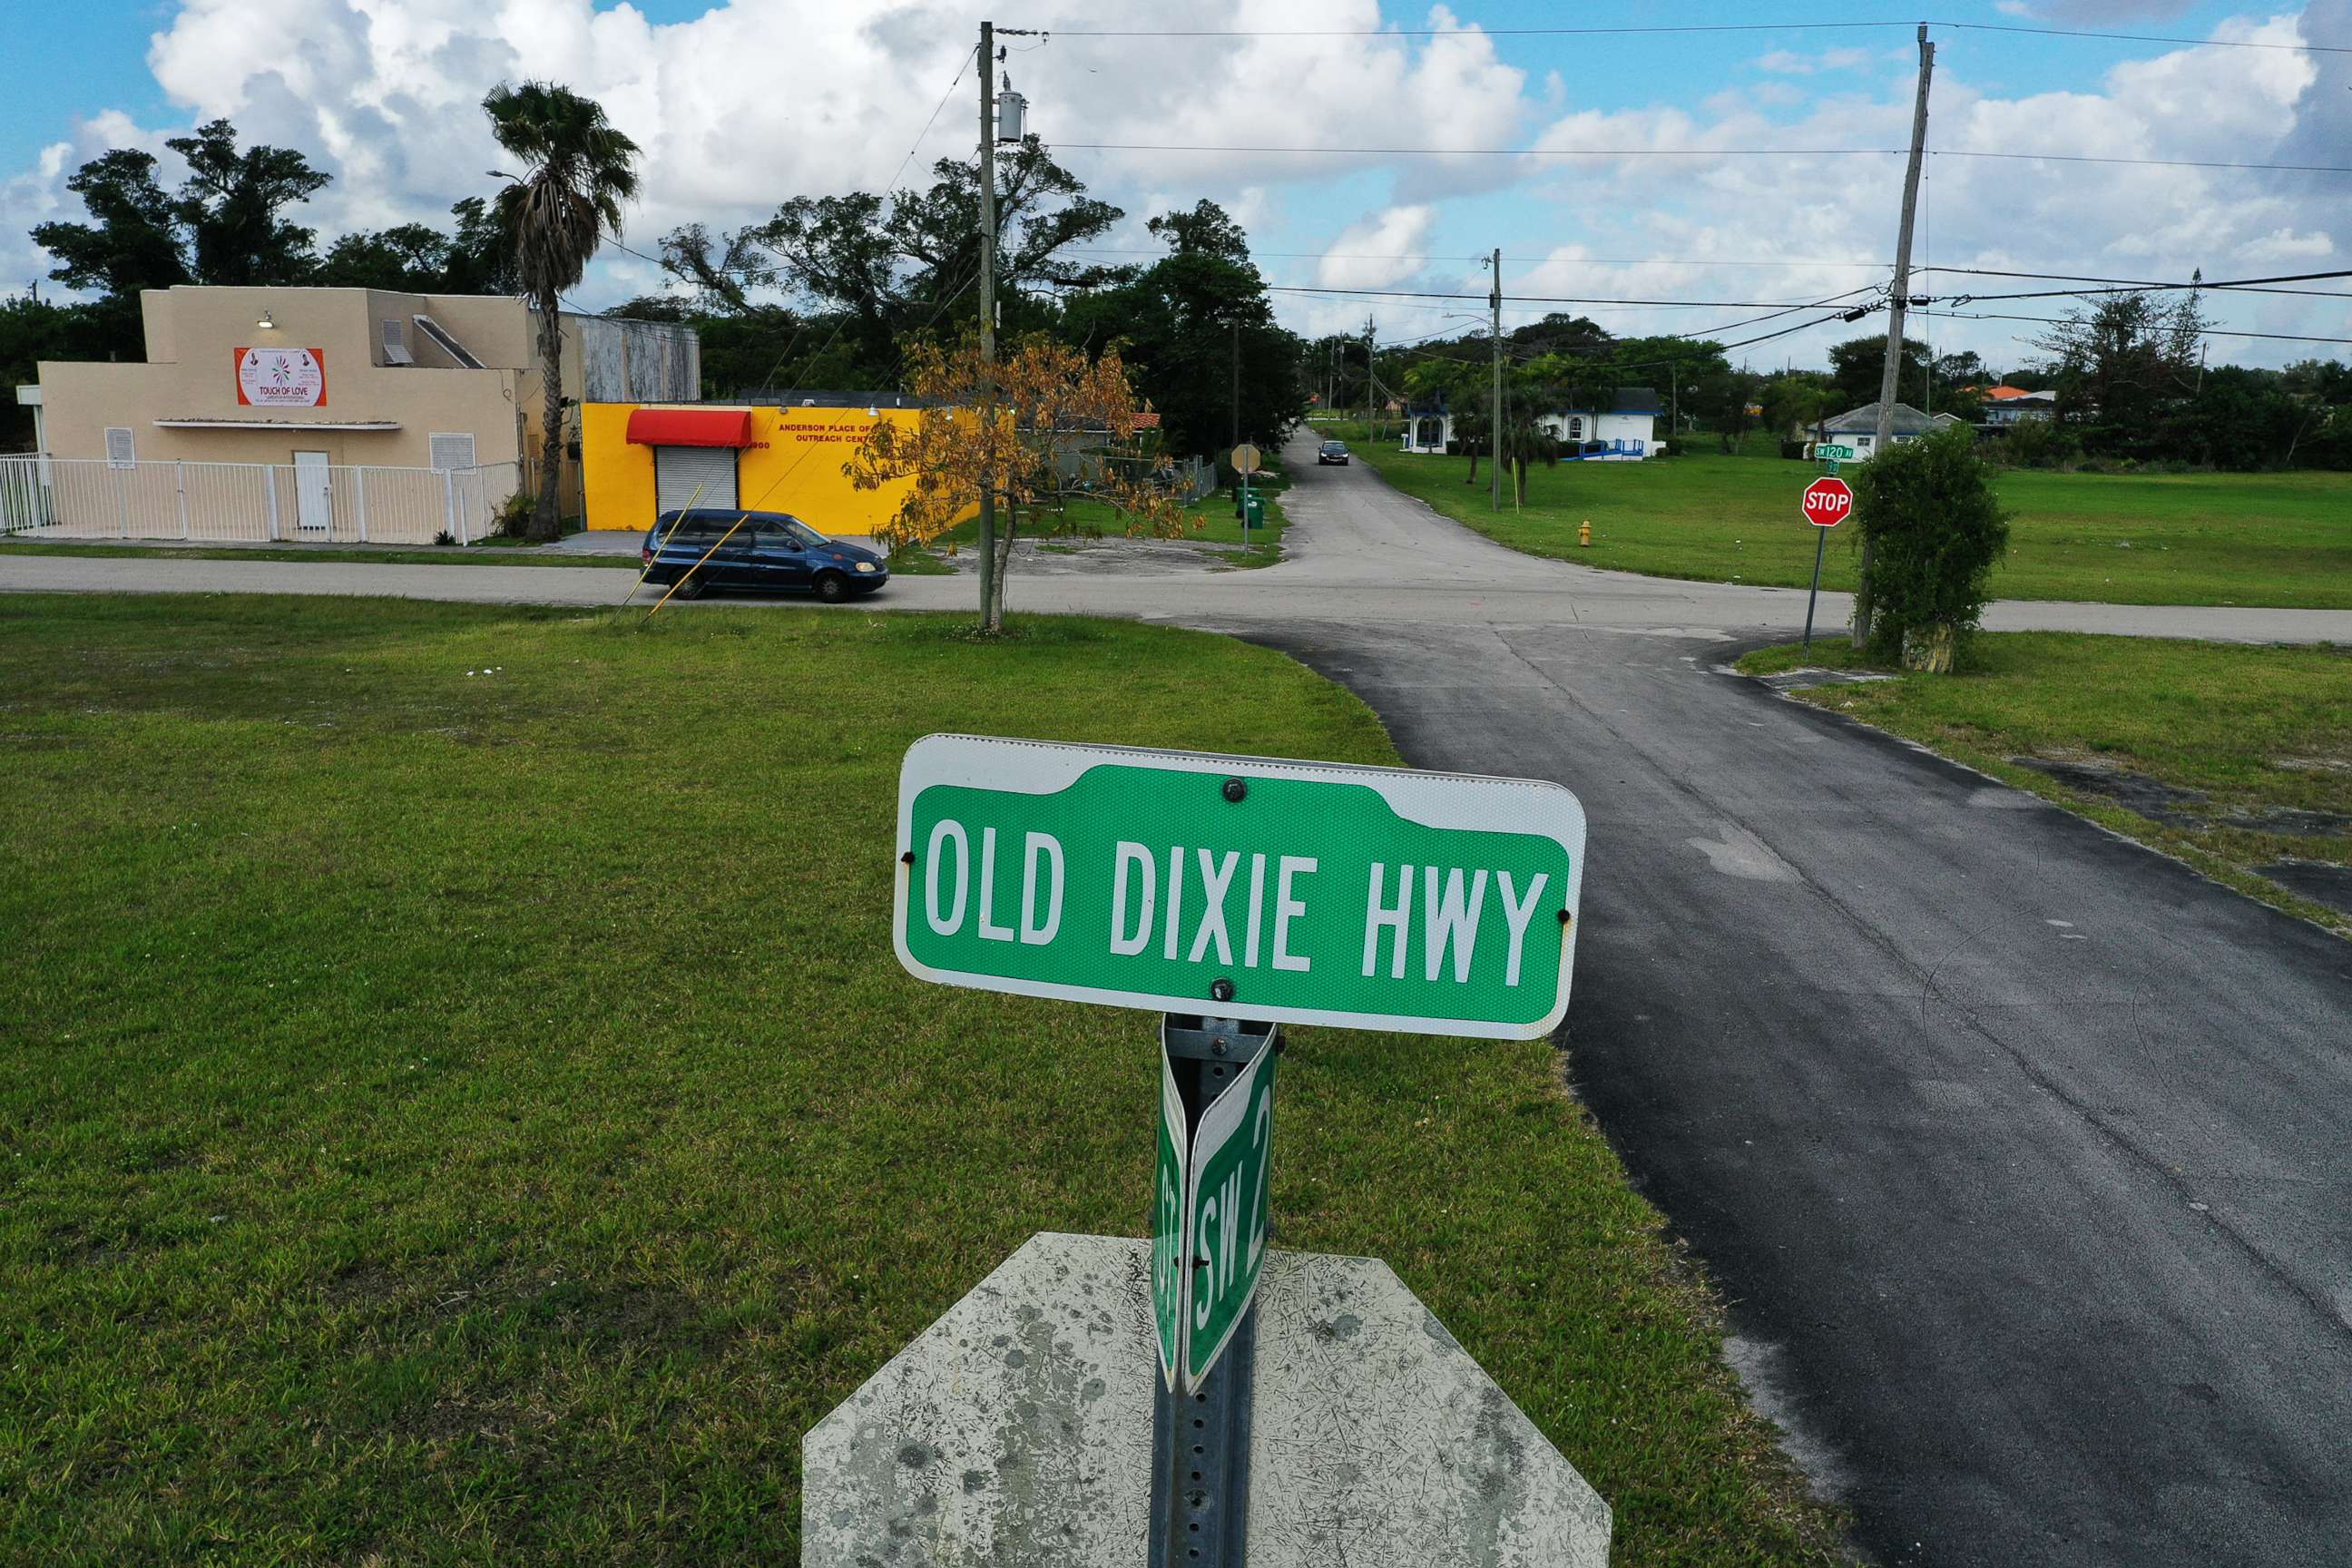 PHOTO: A street sign reads "Old Dixie Hwy" on Feb. 20, 2020, in Homestead, Fla.